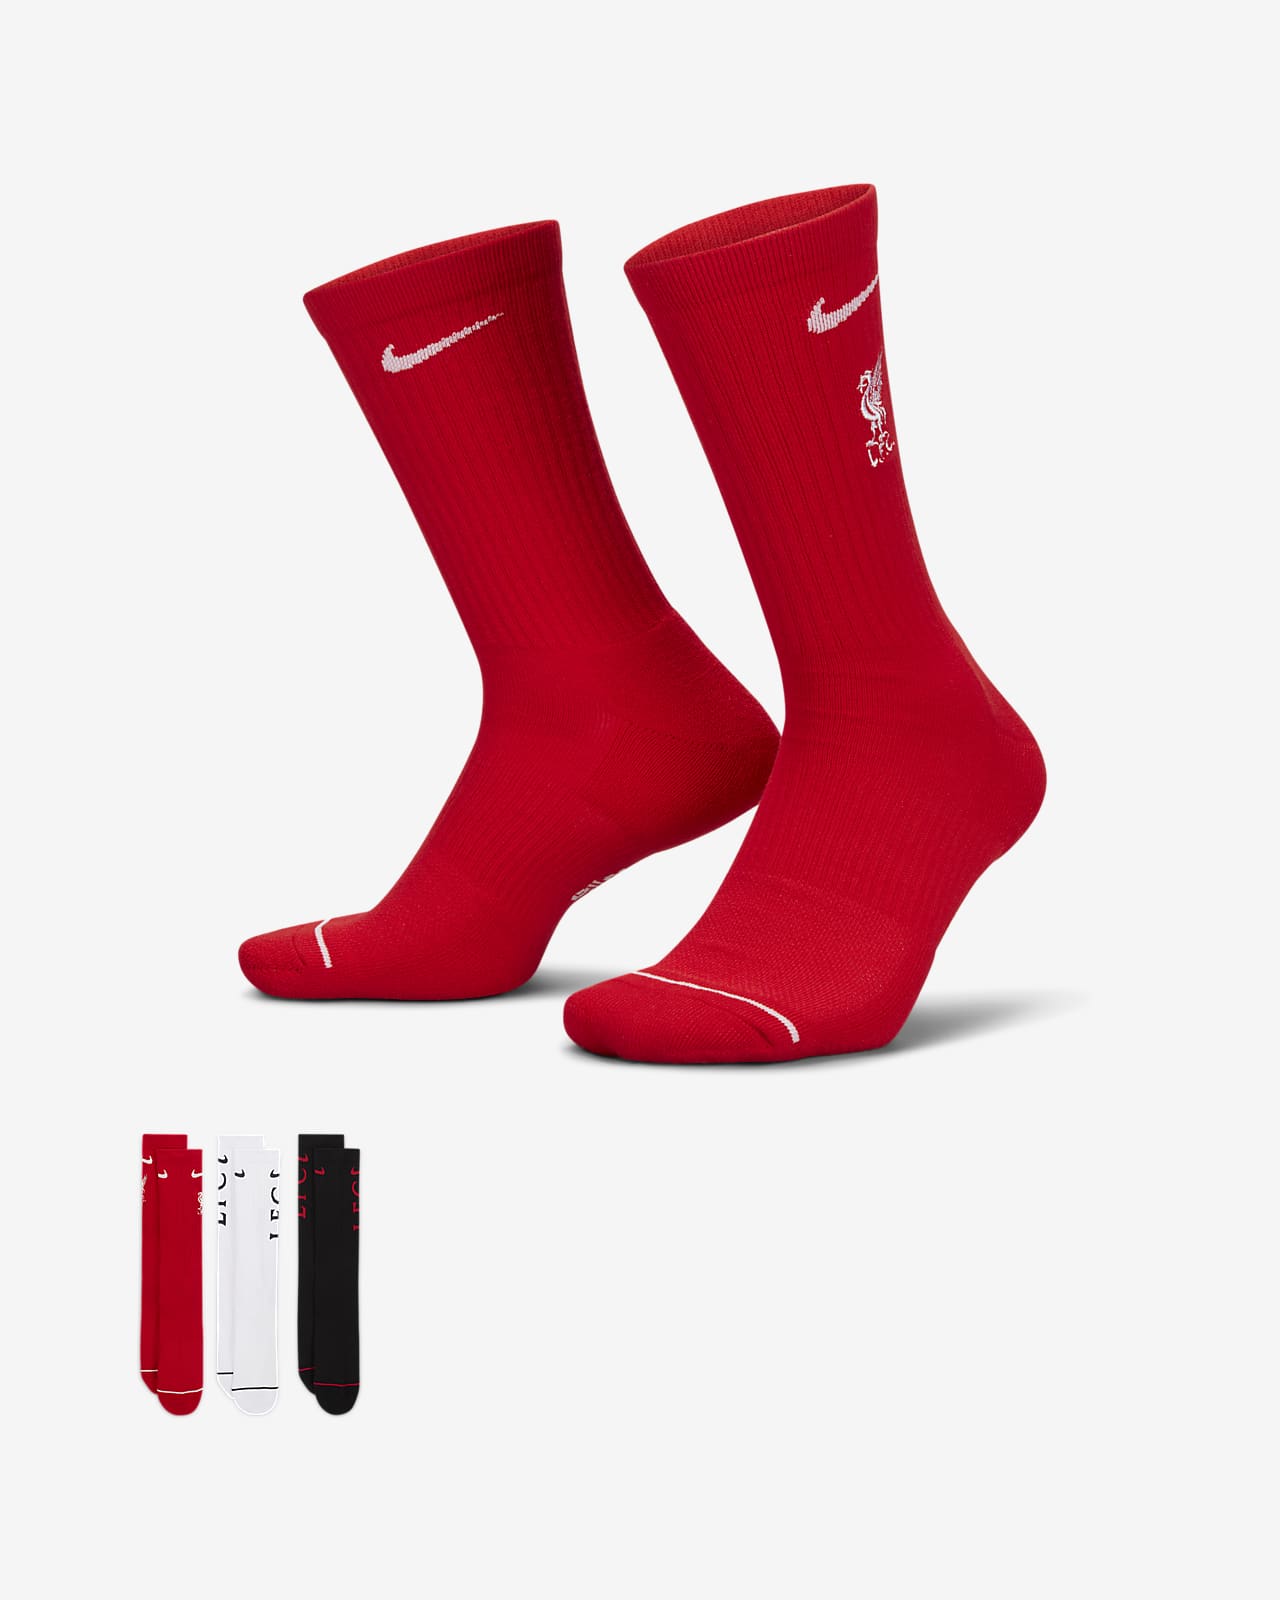 Chaussettes Liverpool Nike Everyday (3 paires)